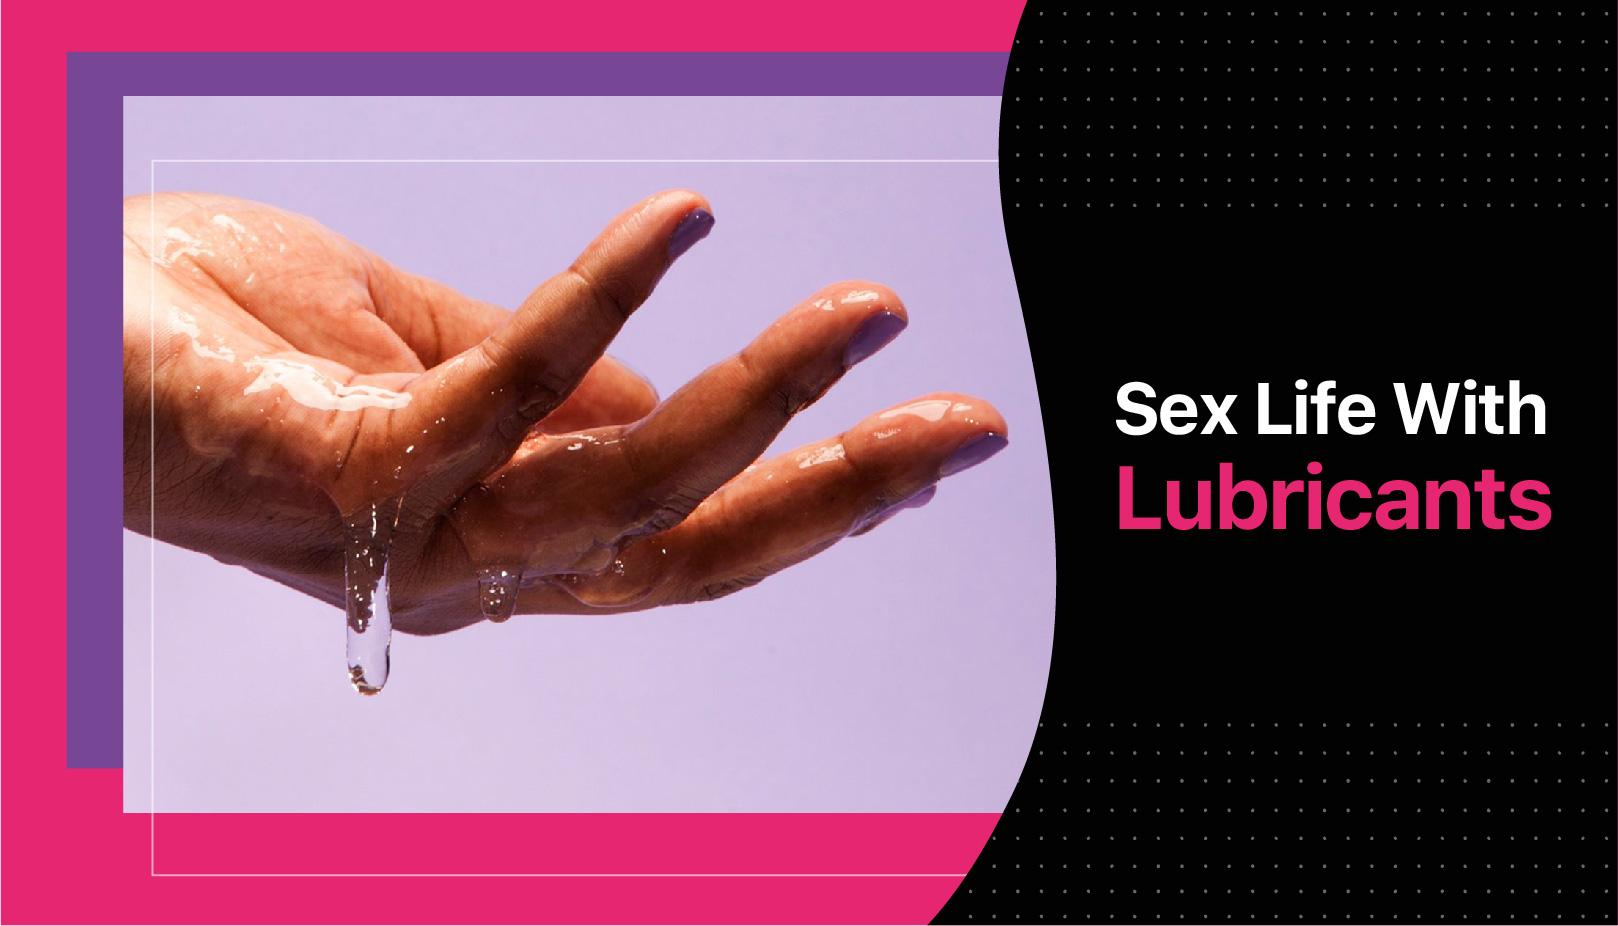 SEX LIFE WITH LUBRICANTS